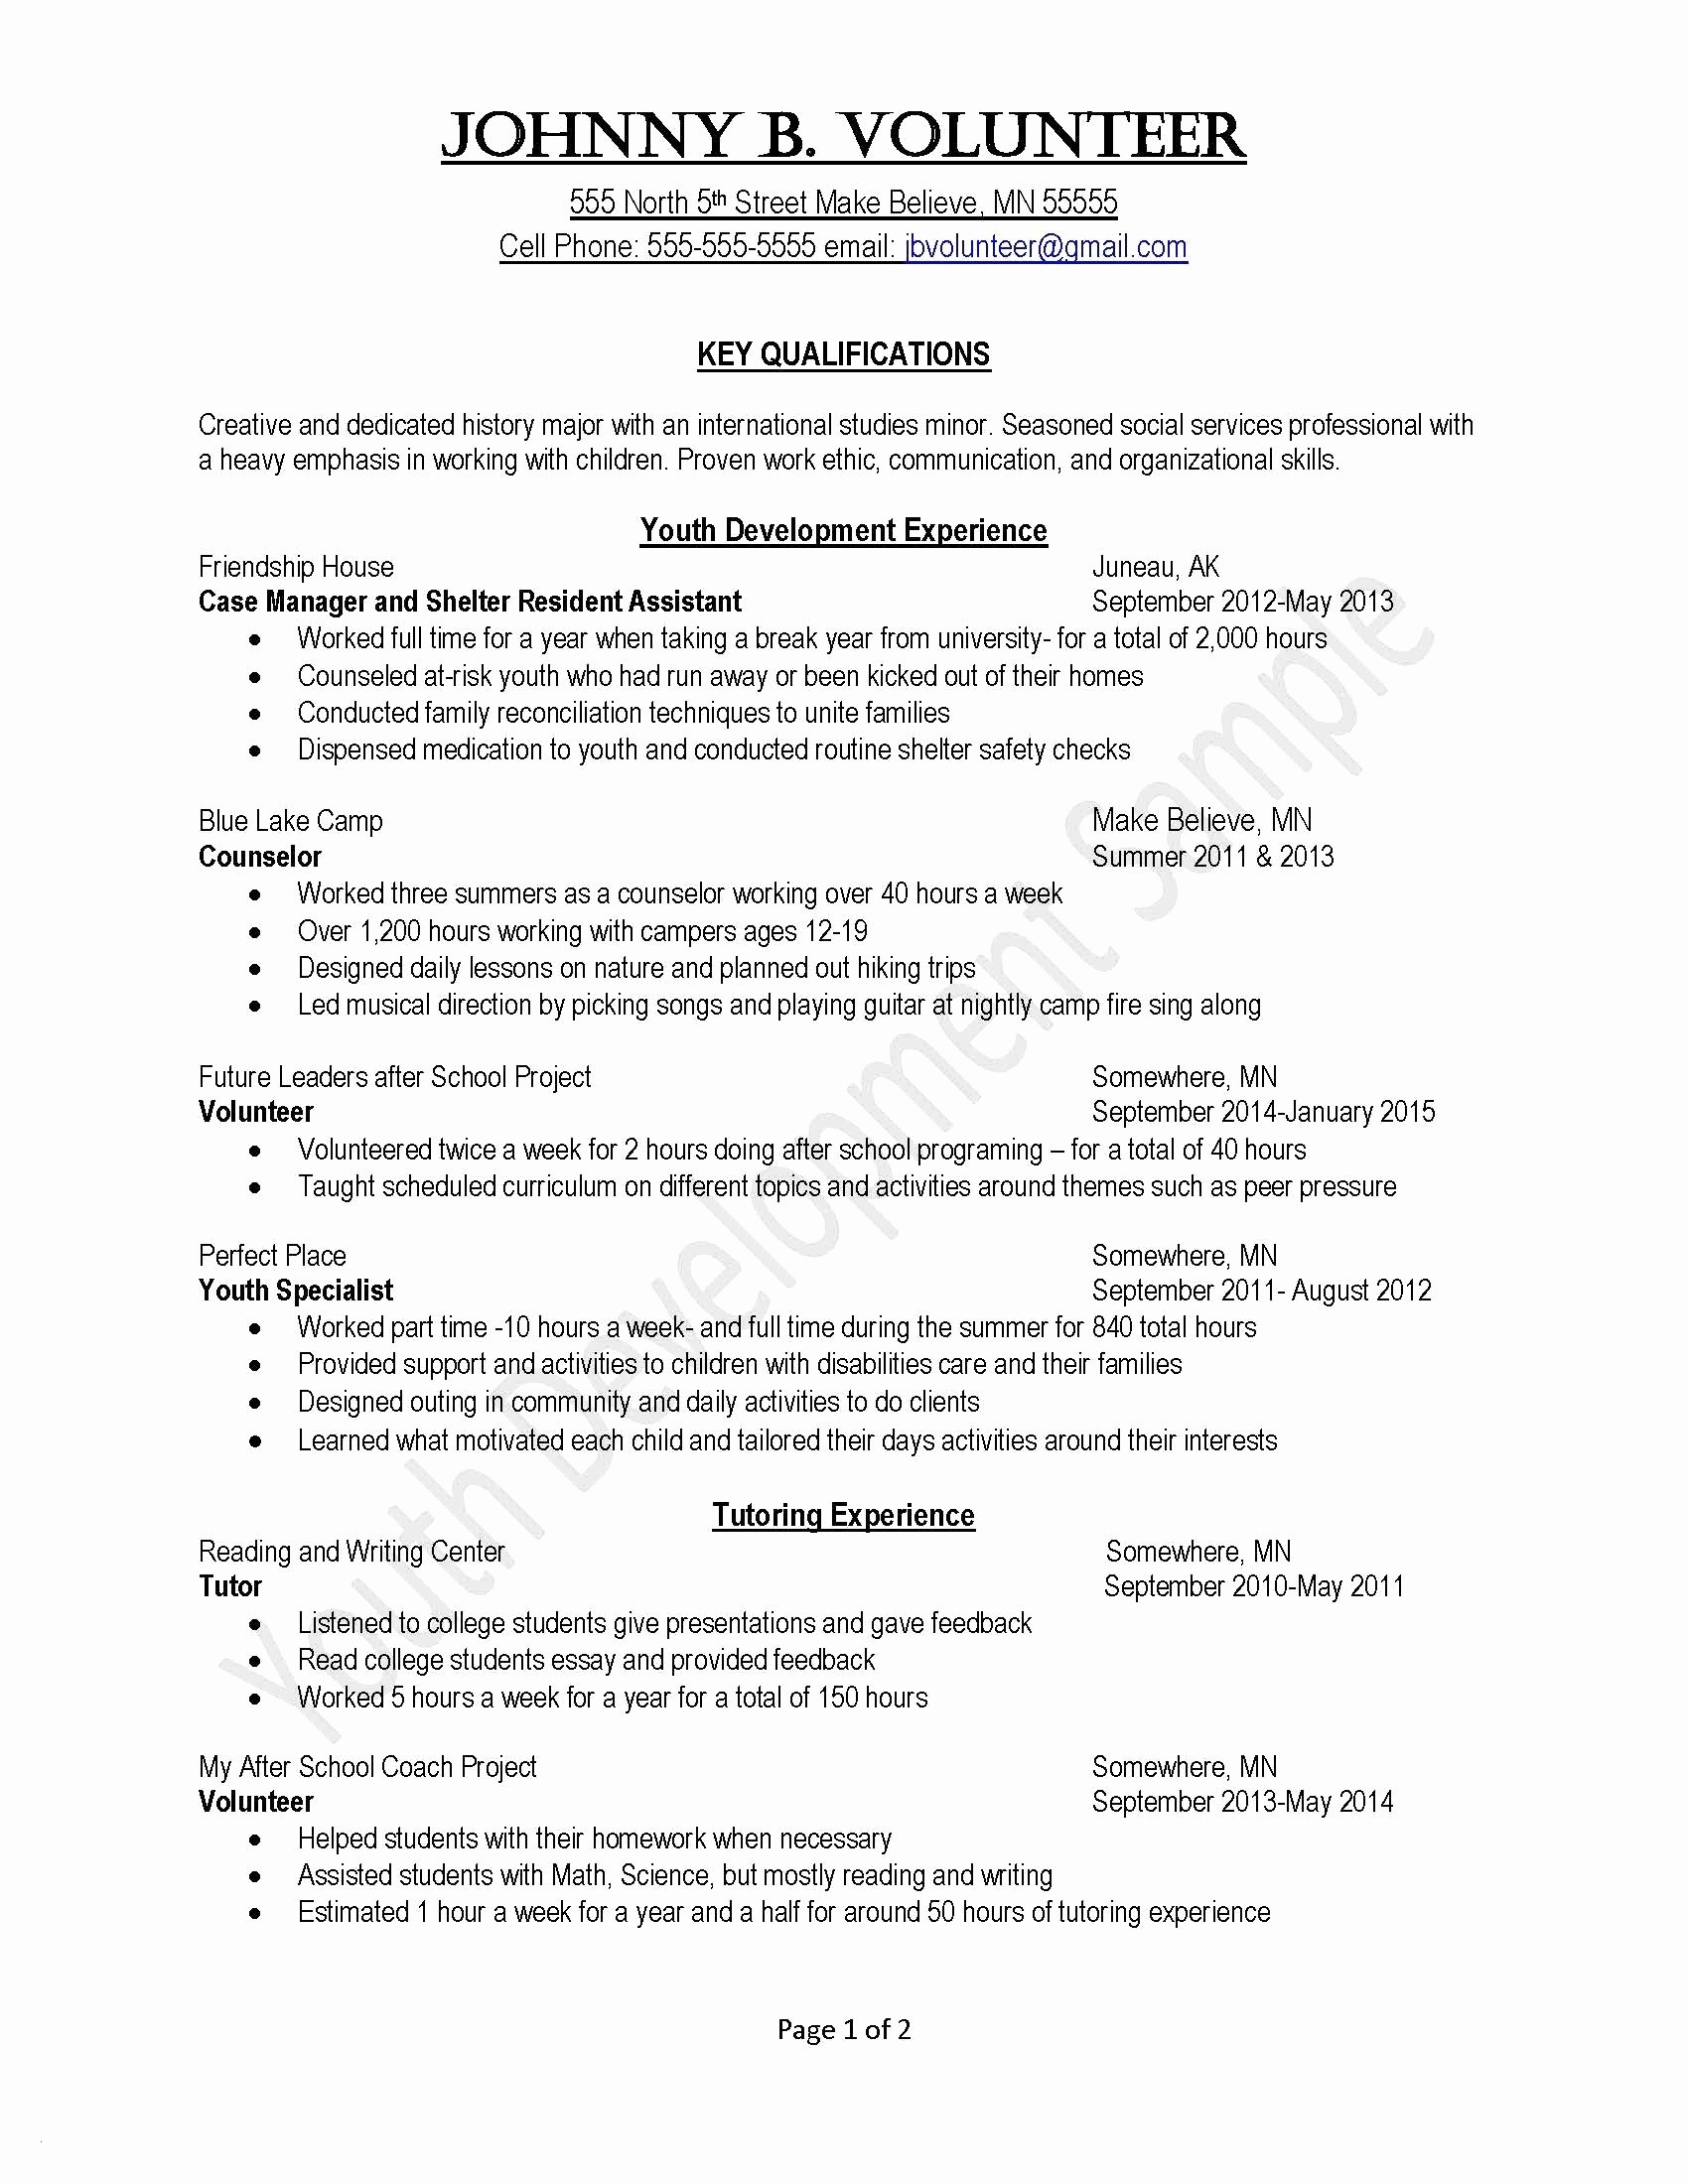 Cover Letter Template Word 2013 Enom with regard to measurements 1700 X 2200